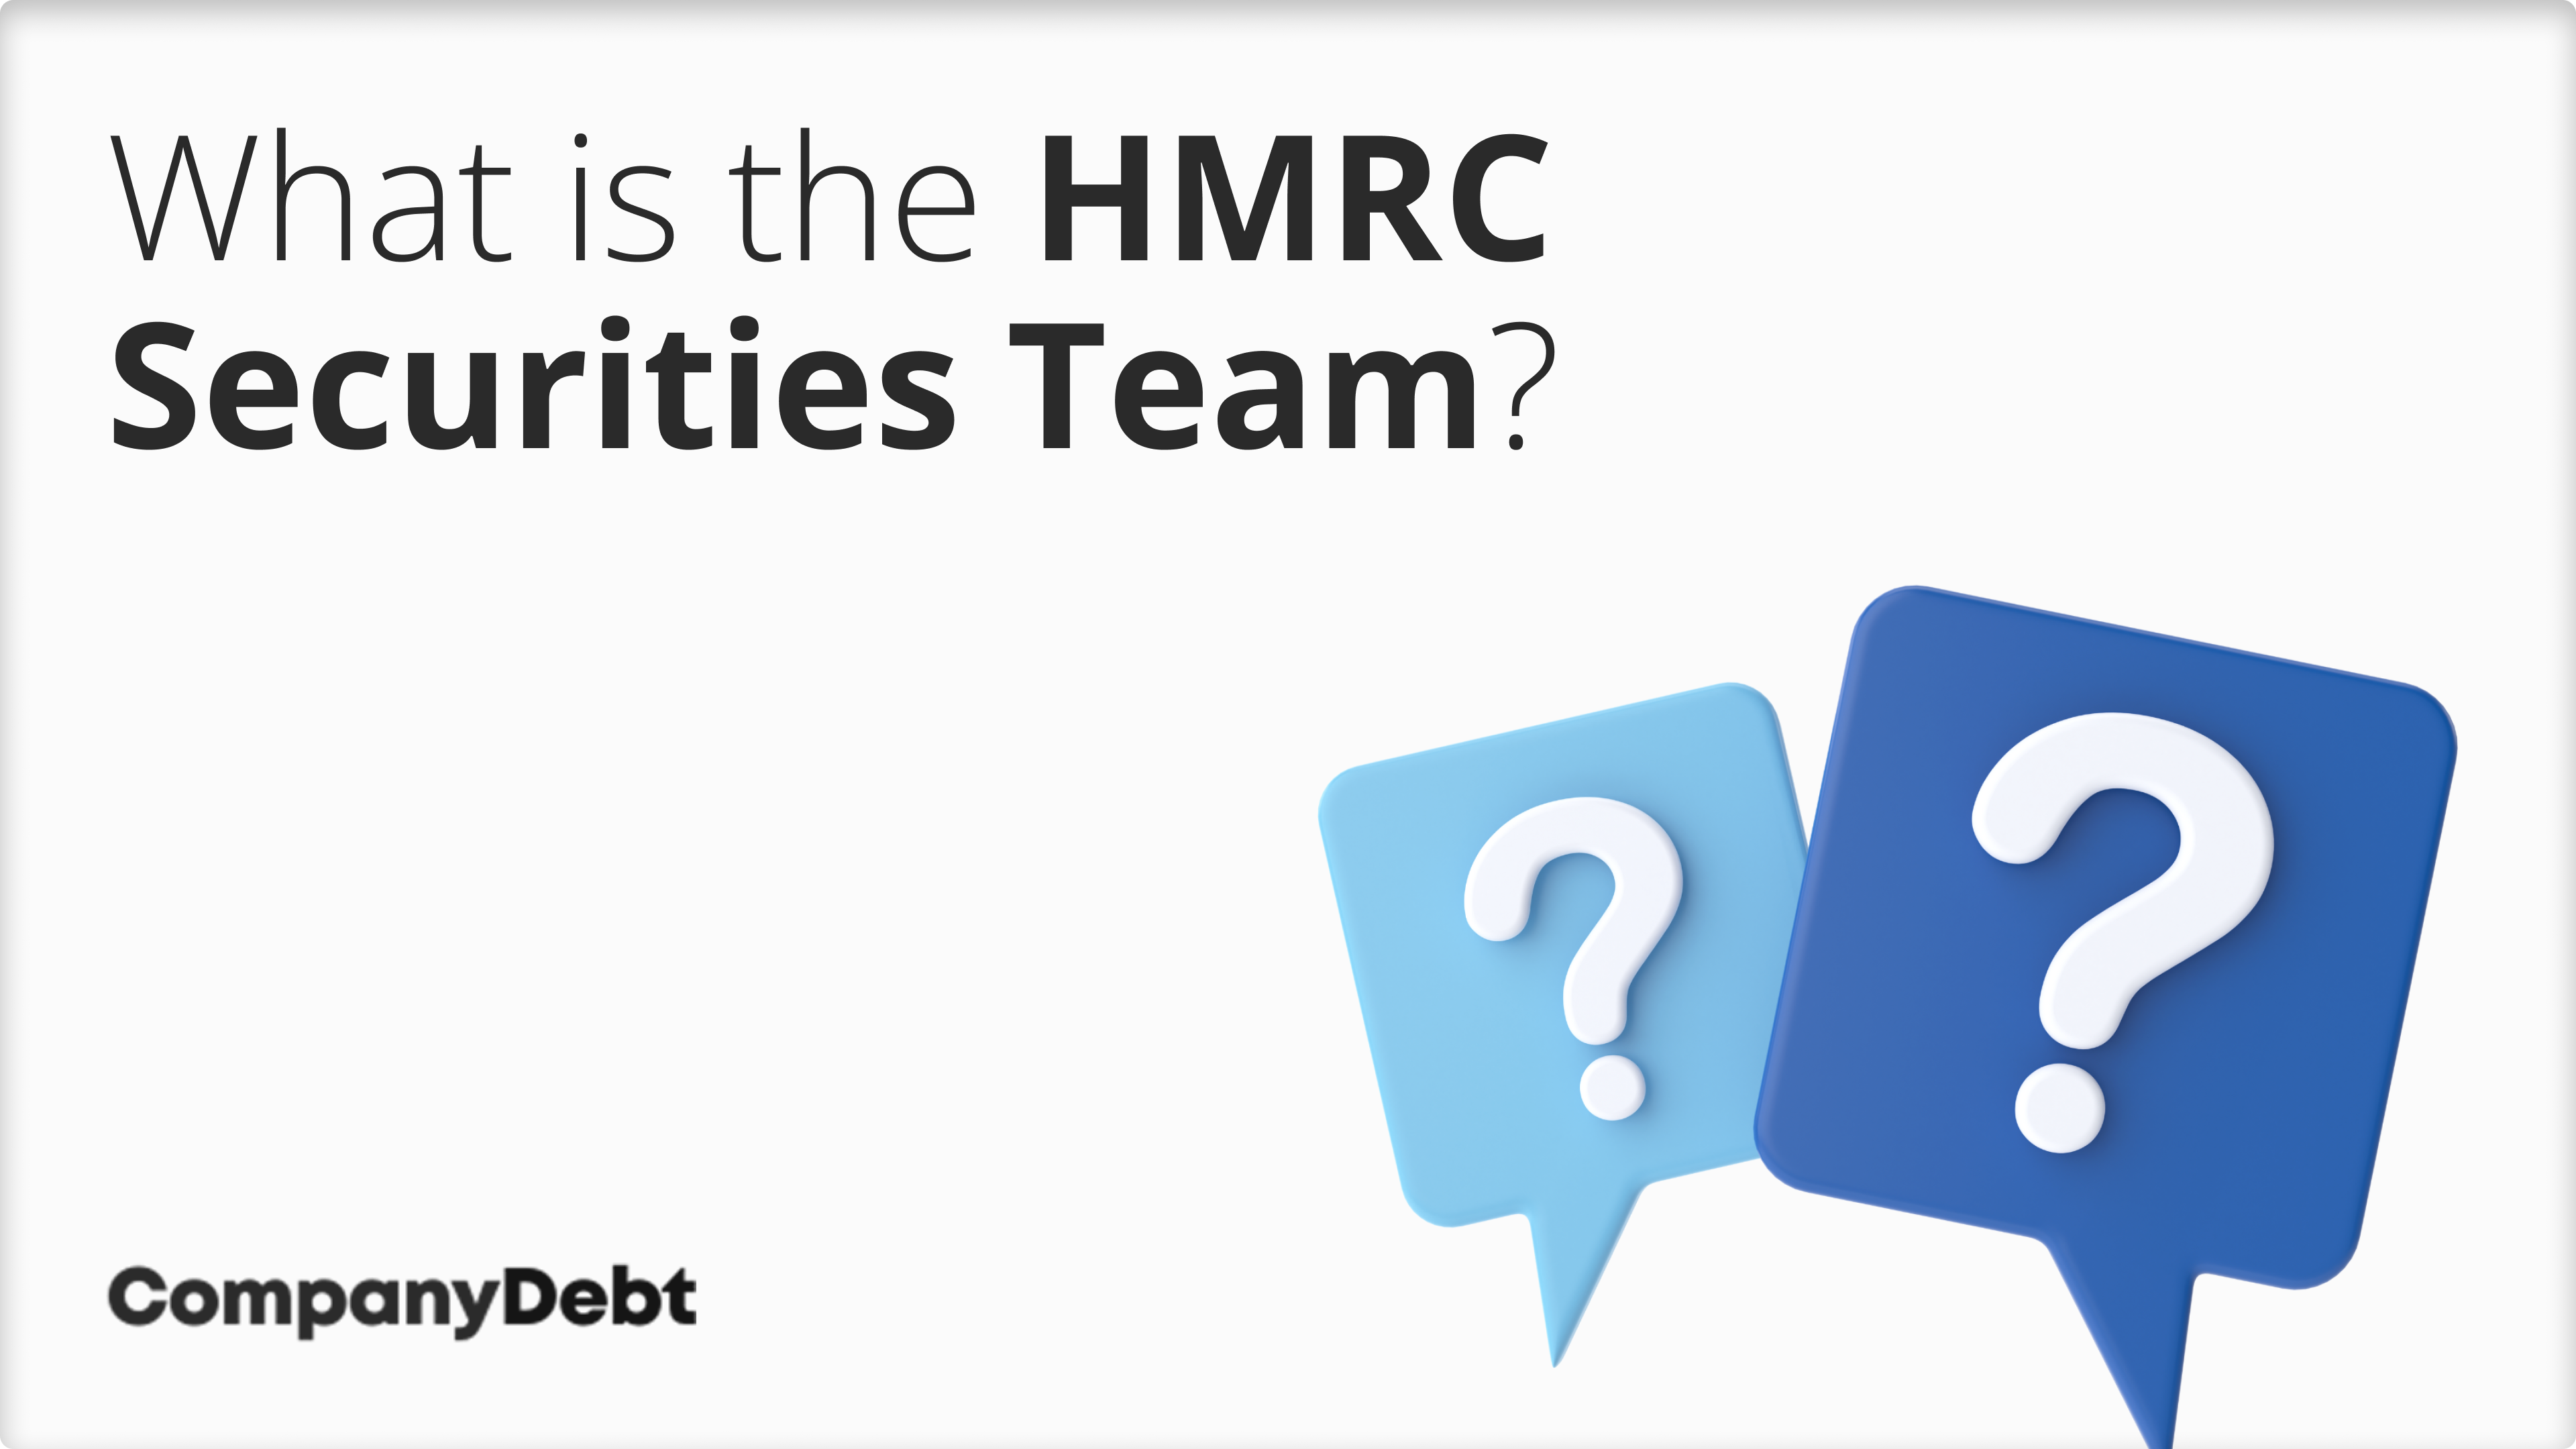 What is the HMRC Securities Team and what does it do?